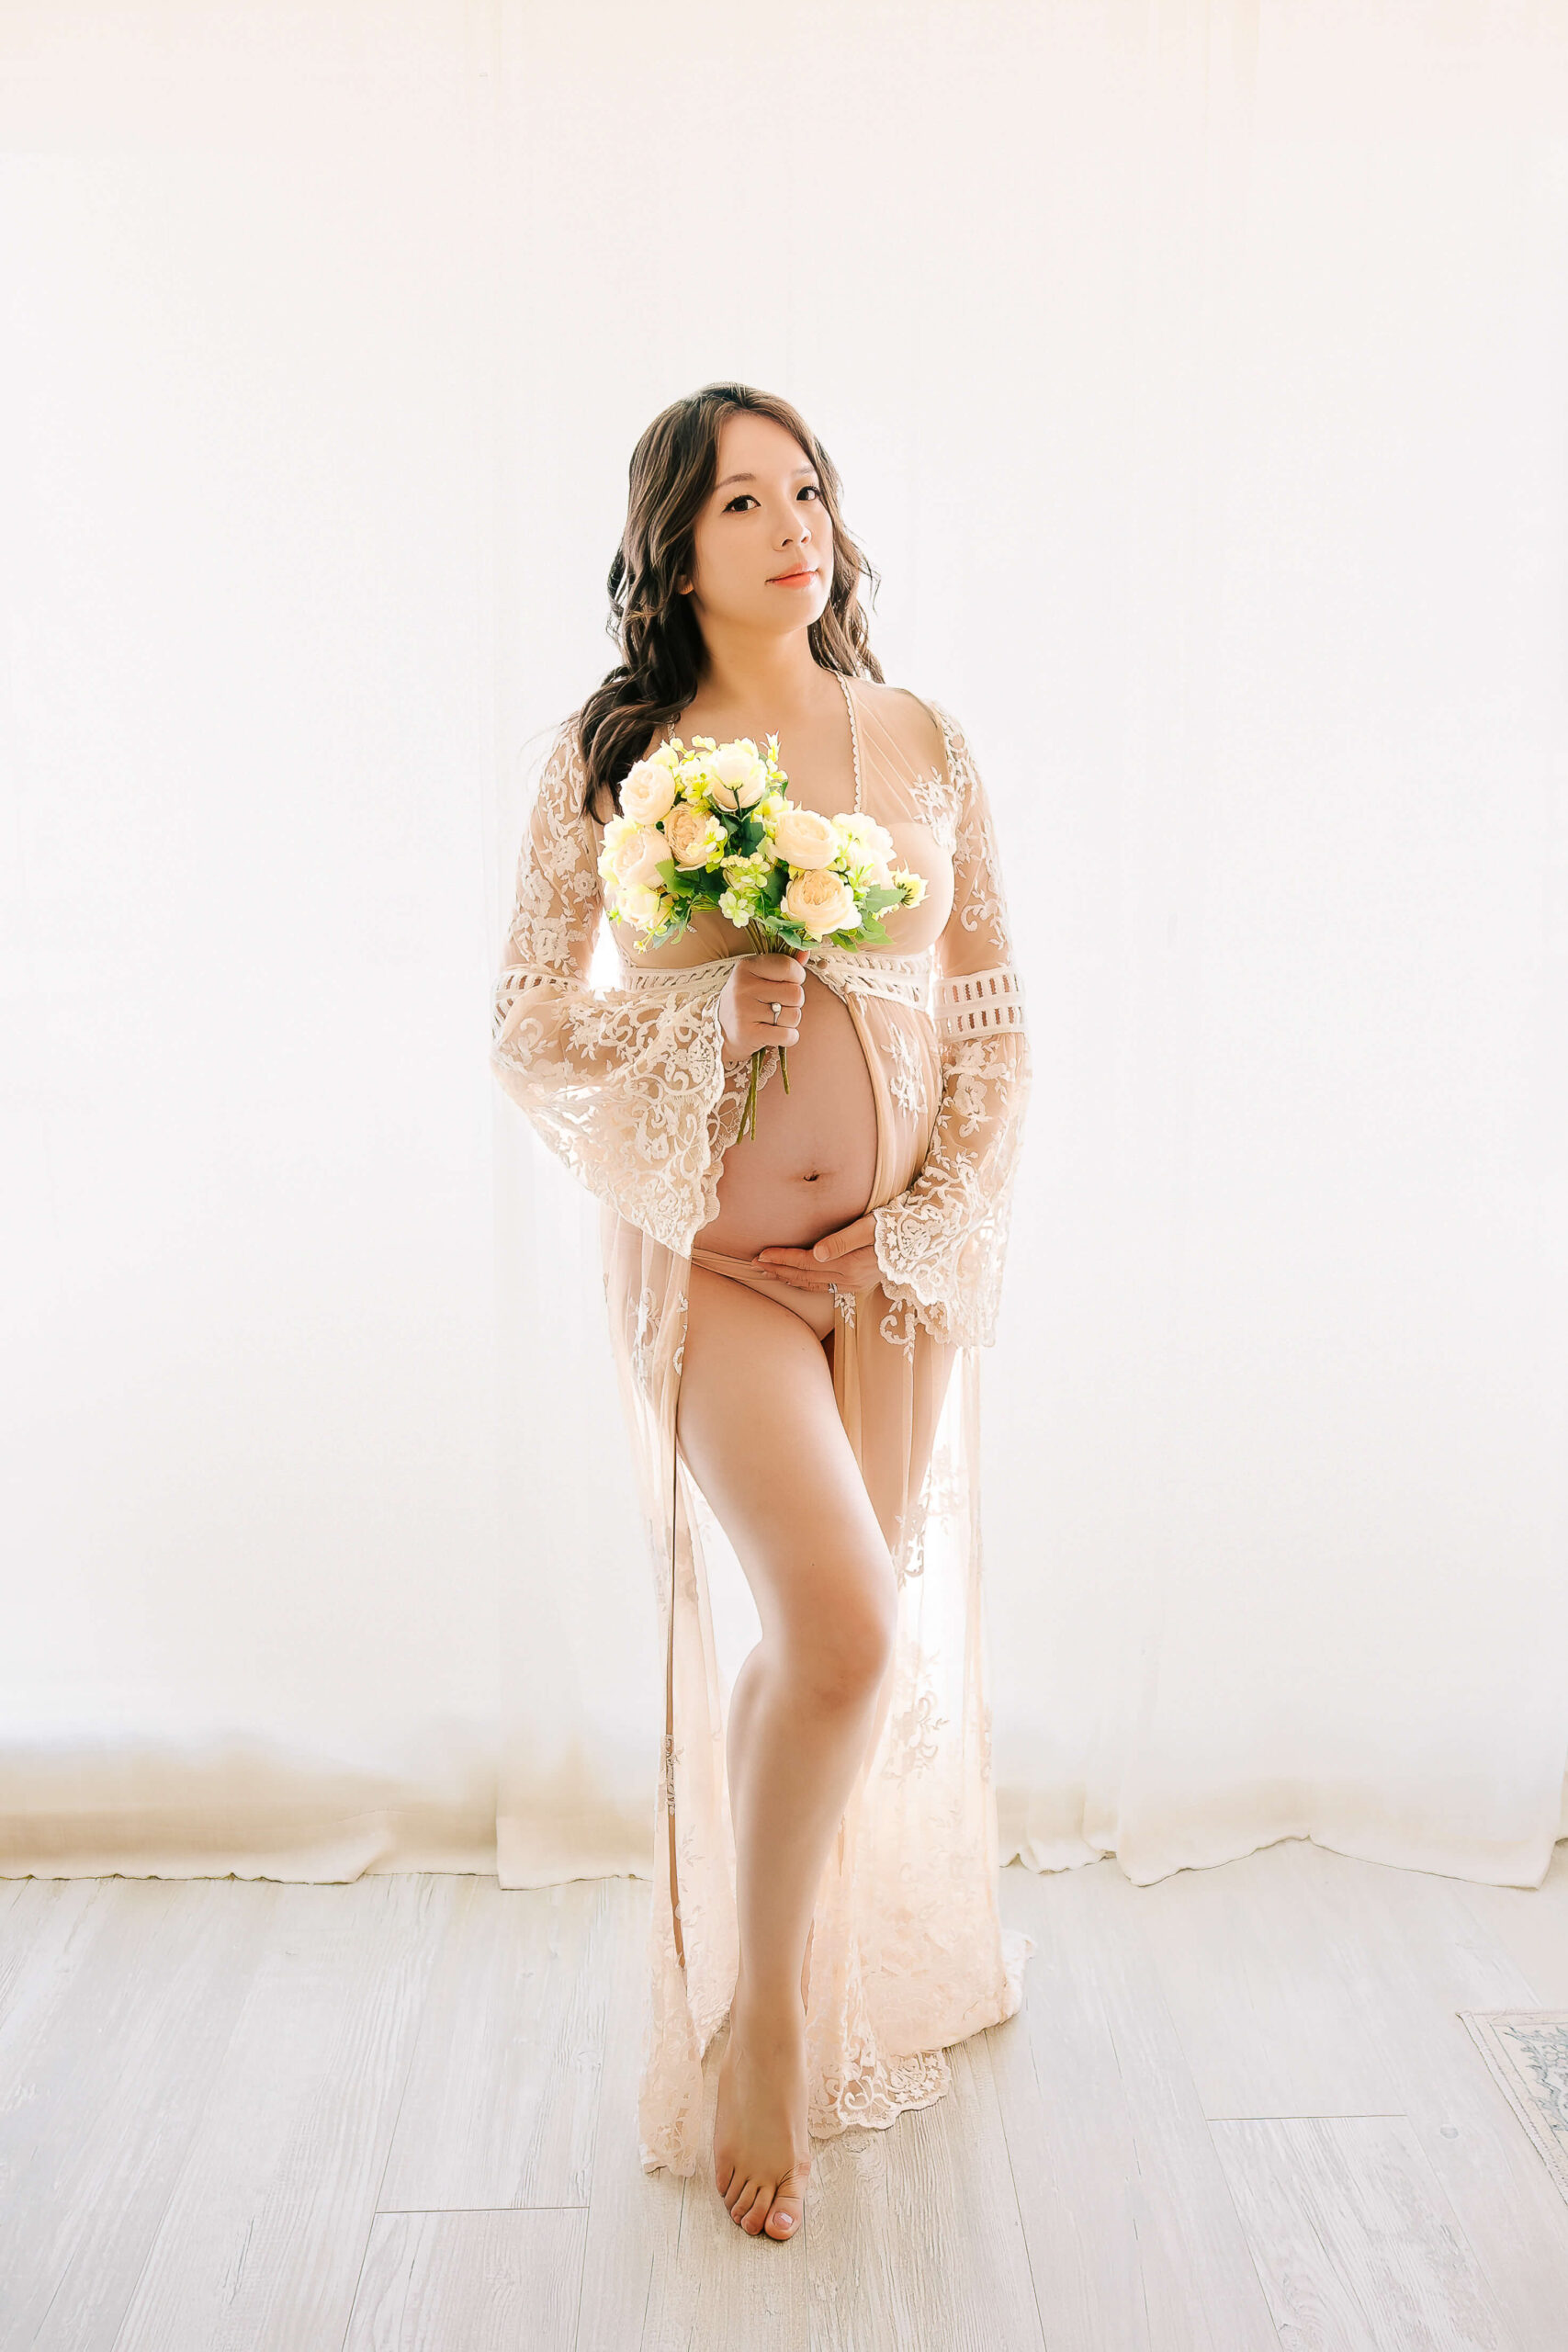 Expectant mom wear kimono robe holding flowers in her maternity boudoir session in studio in Huntington Beach, CA by Ashley Nicole Photography.